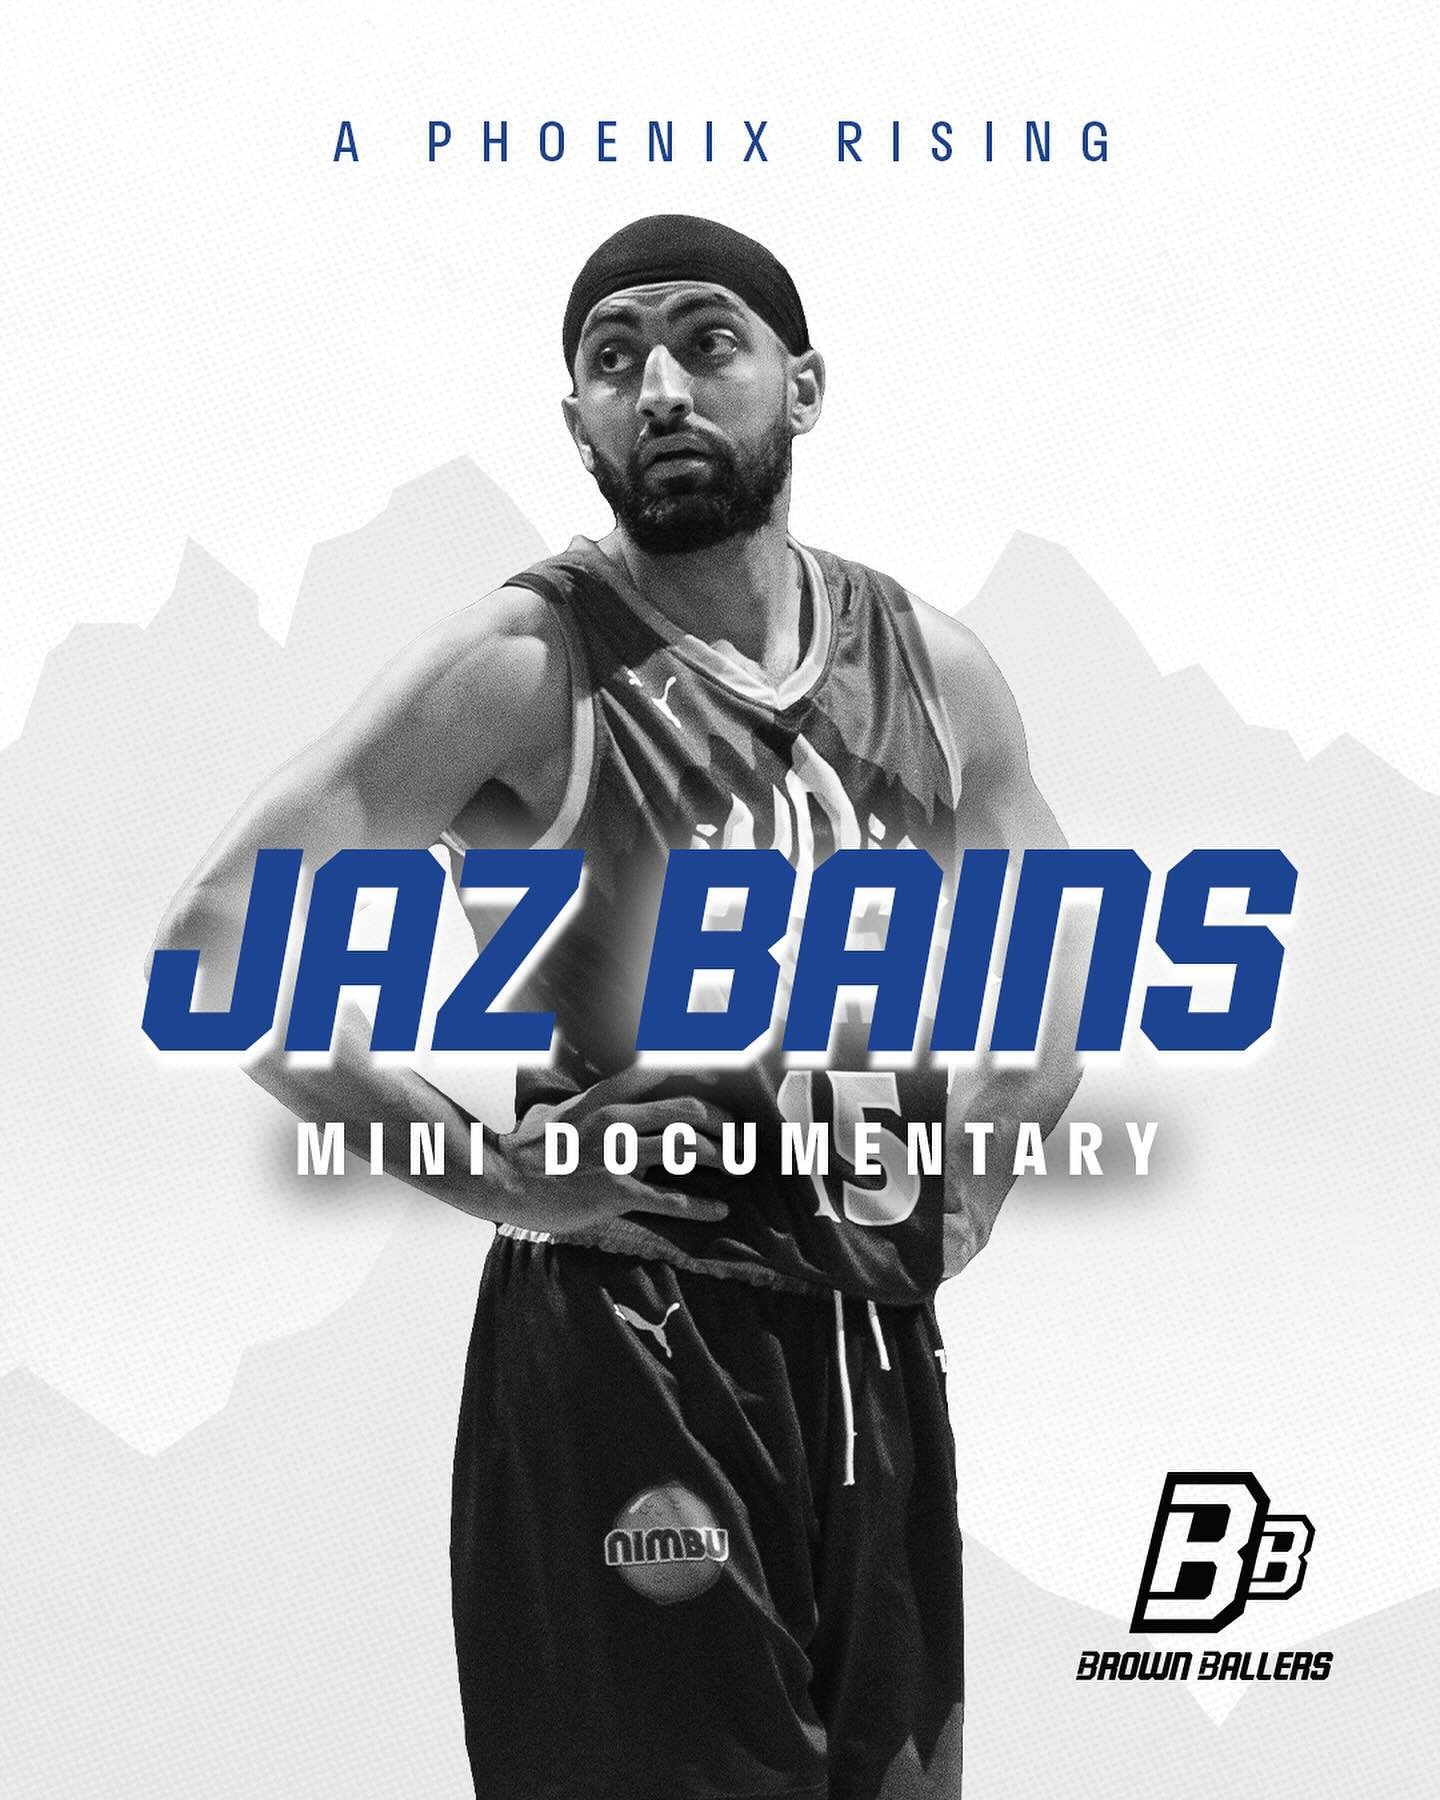 Take a look inside the career of Jaz Bains @jazbains, our India Rising athlete. Don't miss the full documentary, now streaming on our YouTube channel. Discover the dedication and passion that drive Jaz to excel on the court and build a career that to